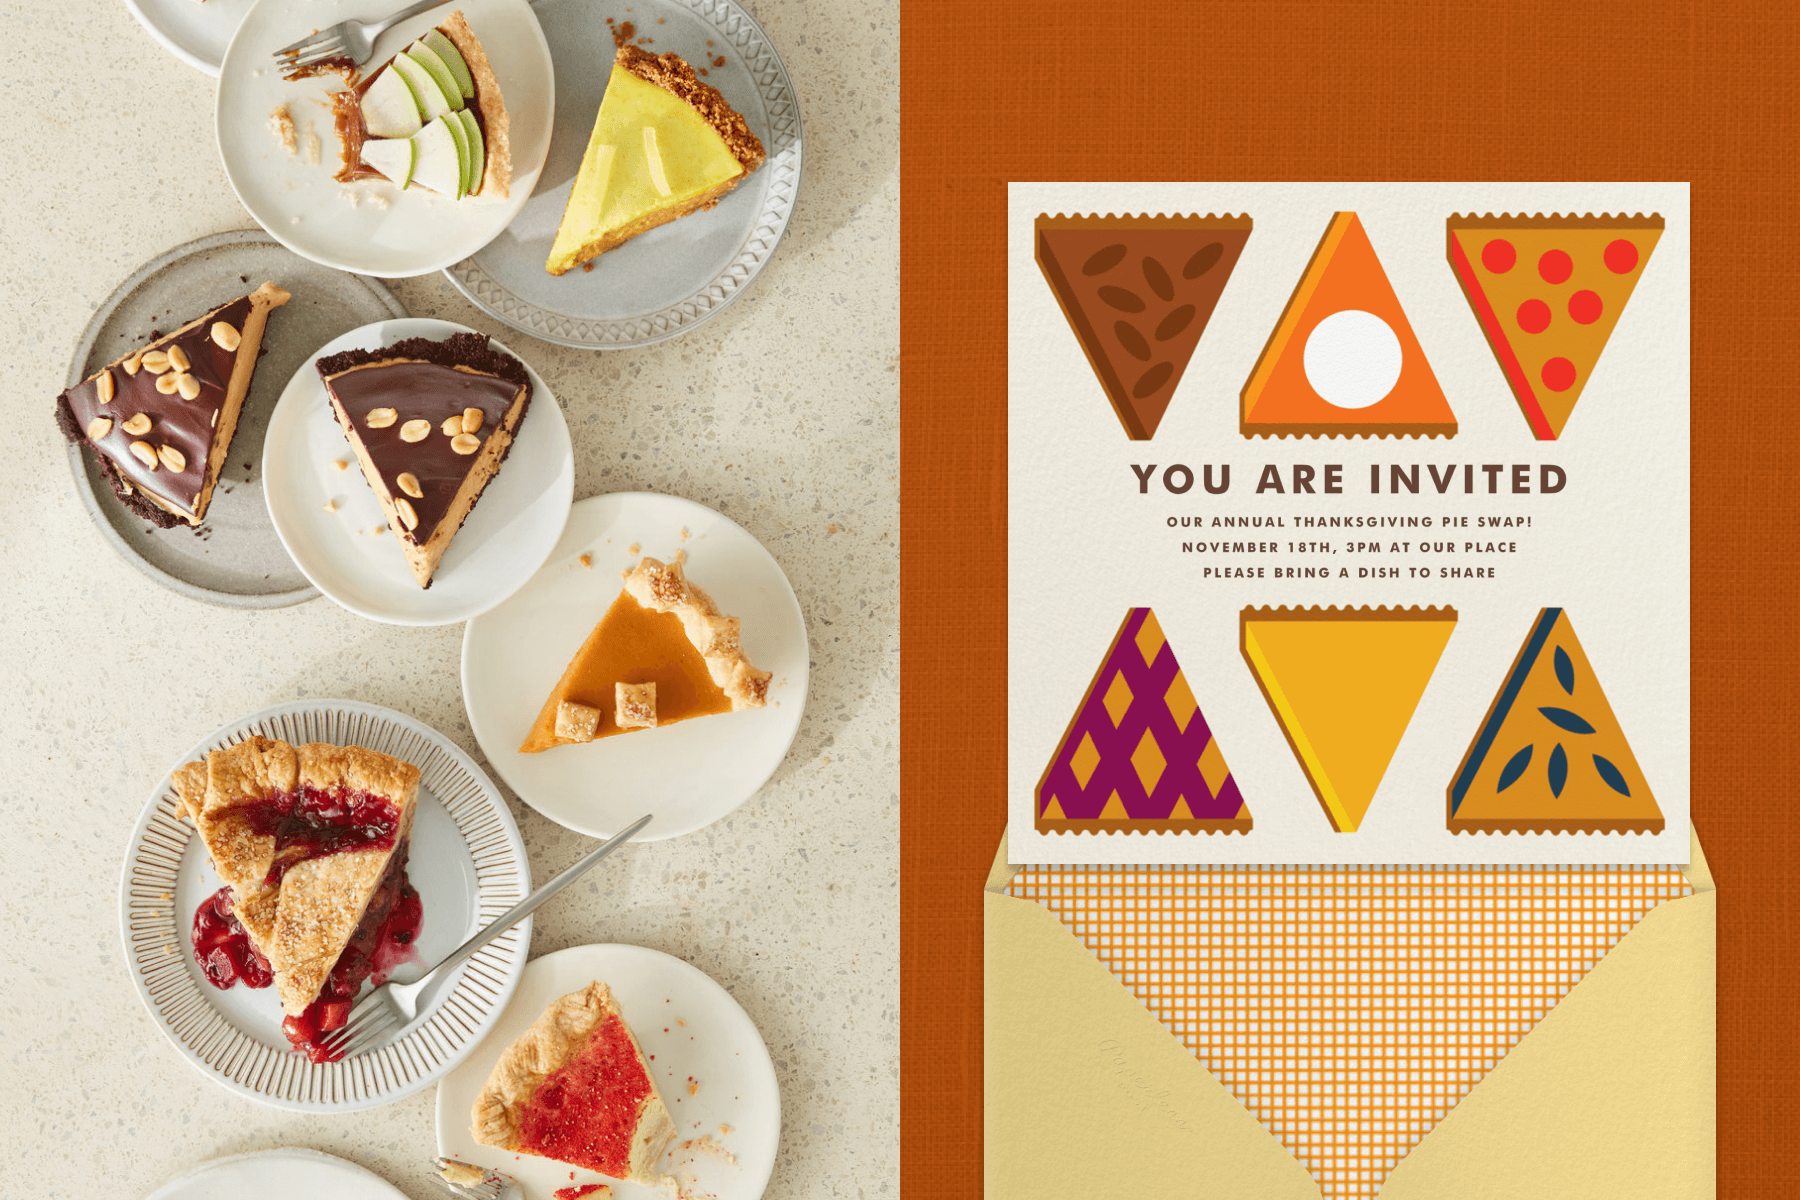 Left: Several slices of different kinds of sweet pies overlap on small white dishes. Right: A Thanksgiving pie swap invitation reads “You are invited” with geometric interpretations of six colorful pie slices.